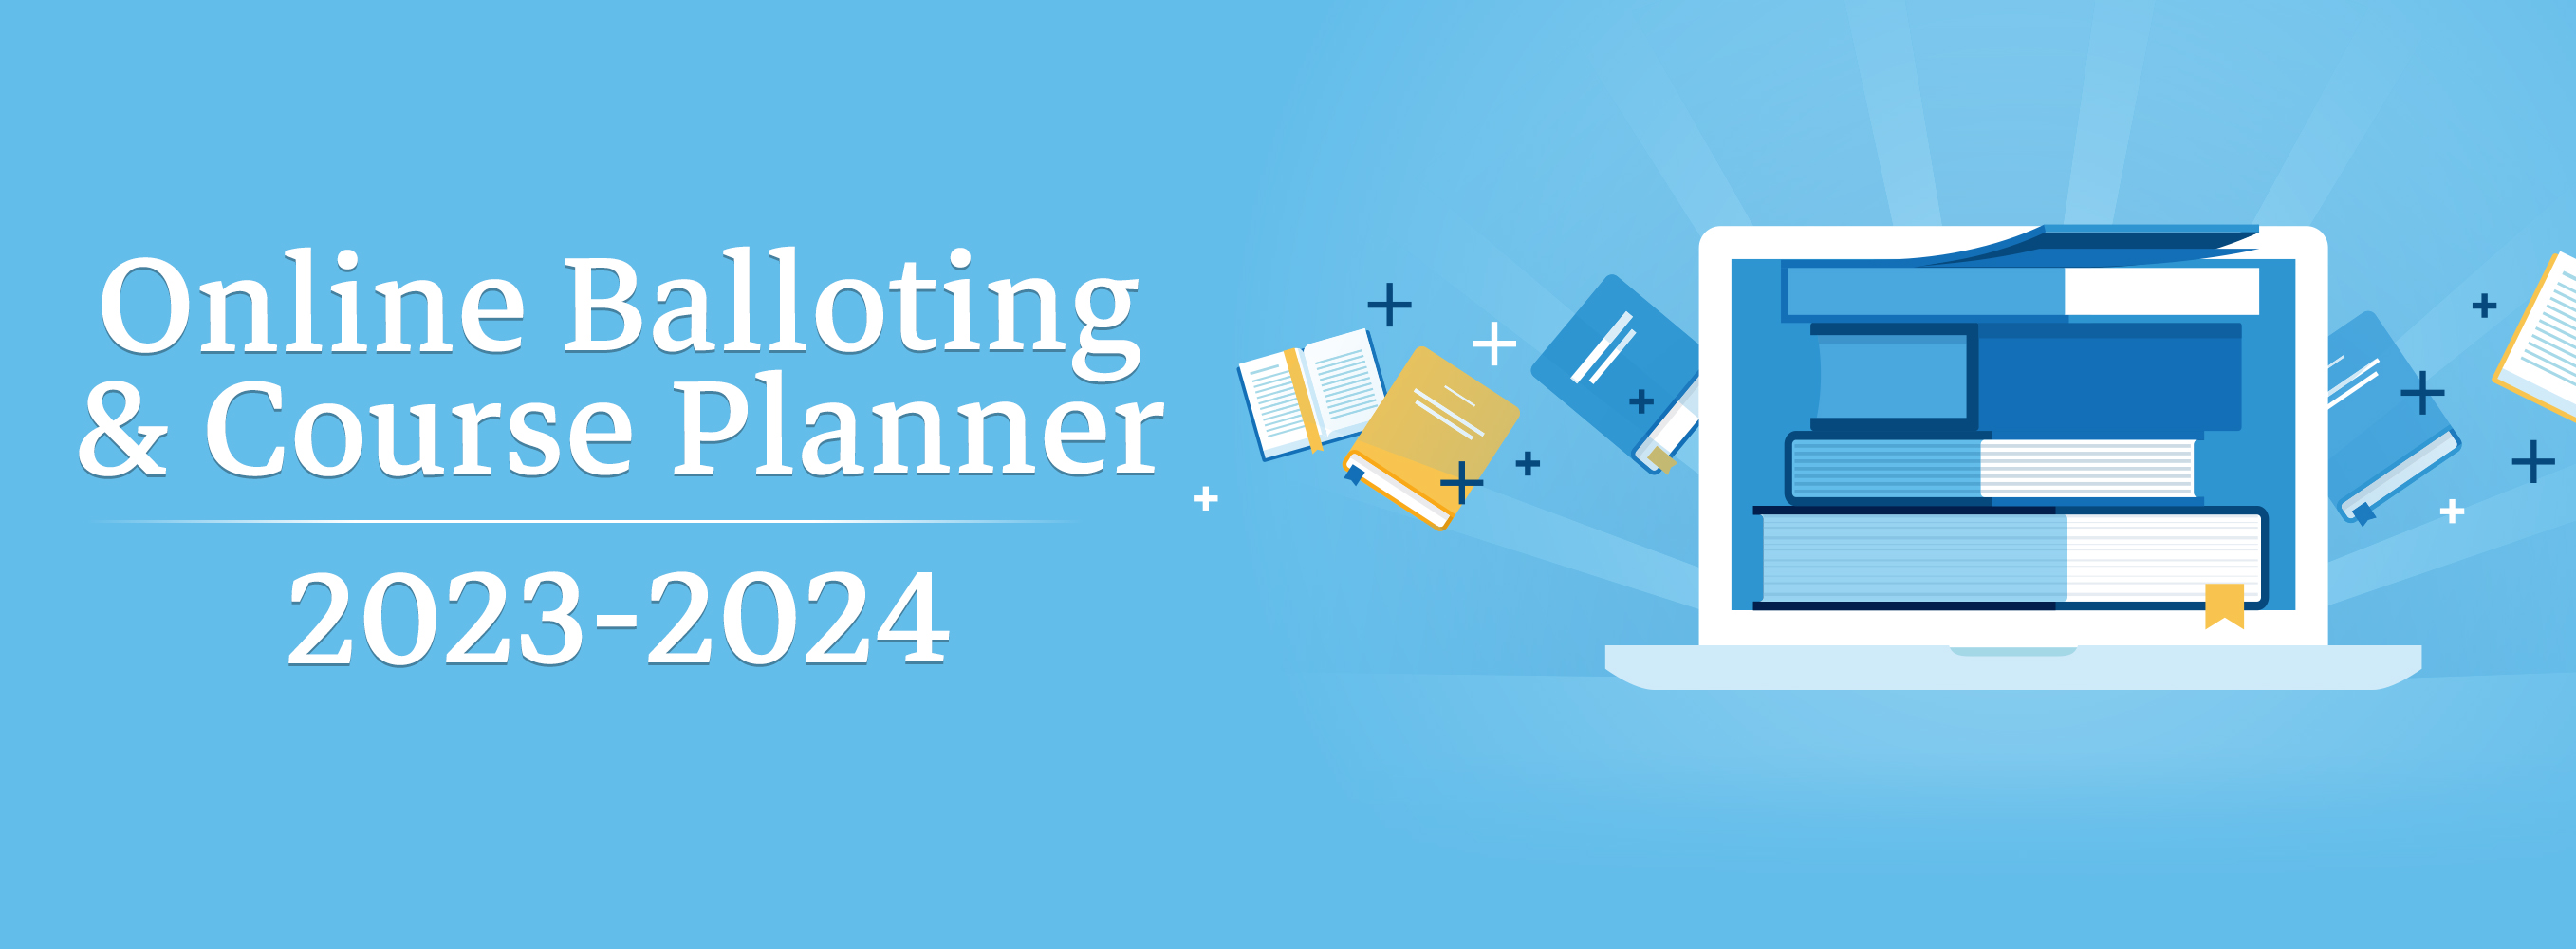 2023-2024 Online Balloting and Course Planner gallery image banner